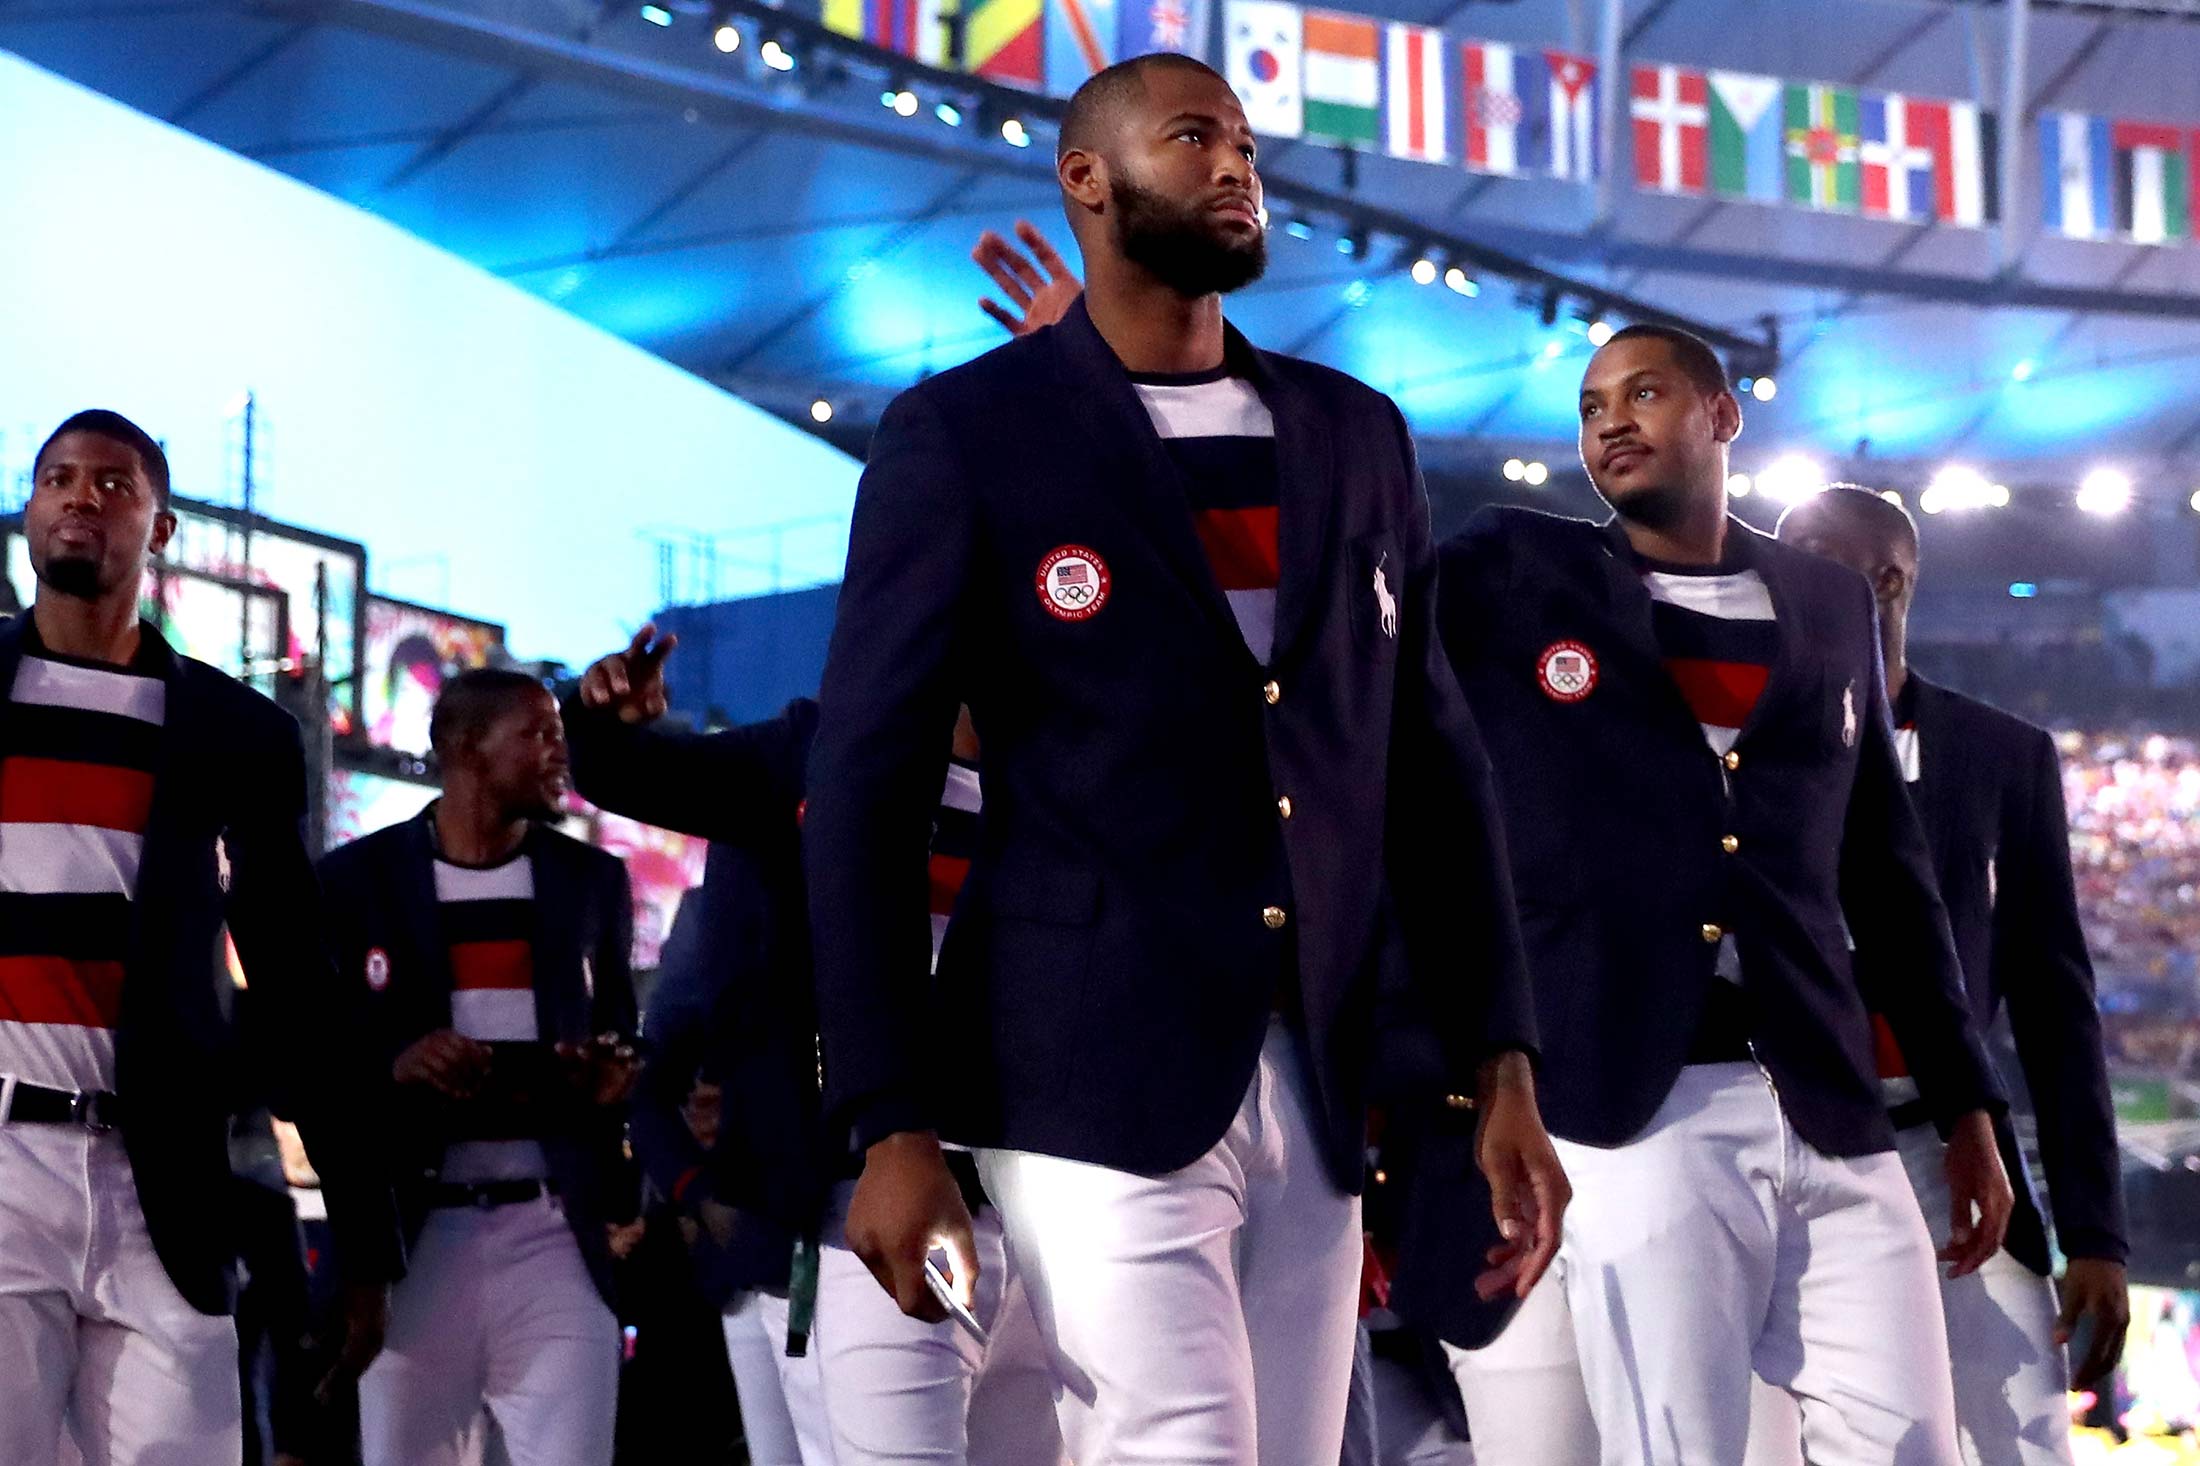 Members of the U.S. olympic team at the opening ceremony of the Rio 2016 Olympic Games.
